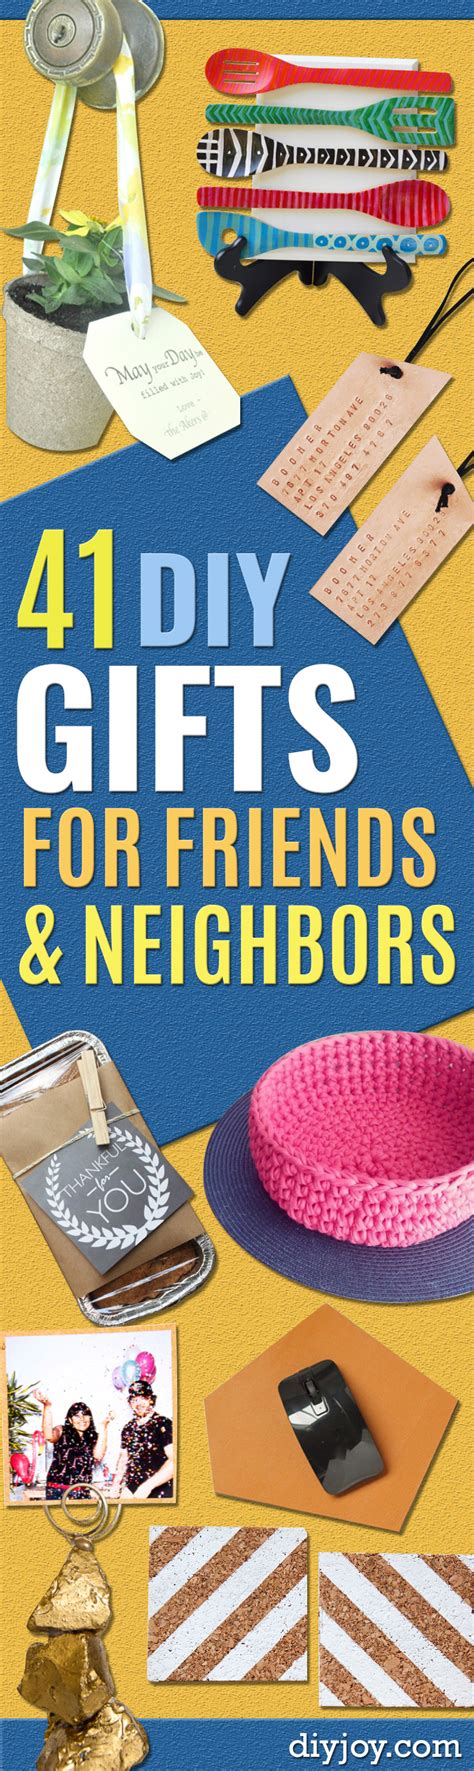 But it can also get kind of pricey! 41 Best Gifts To Make for Friends and Neighbors